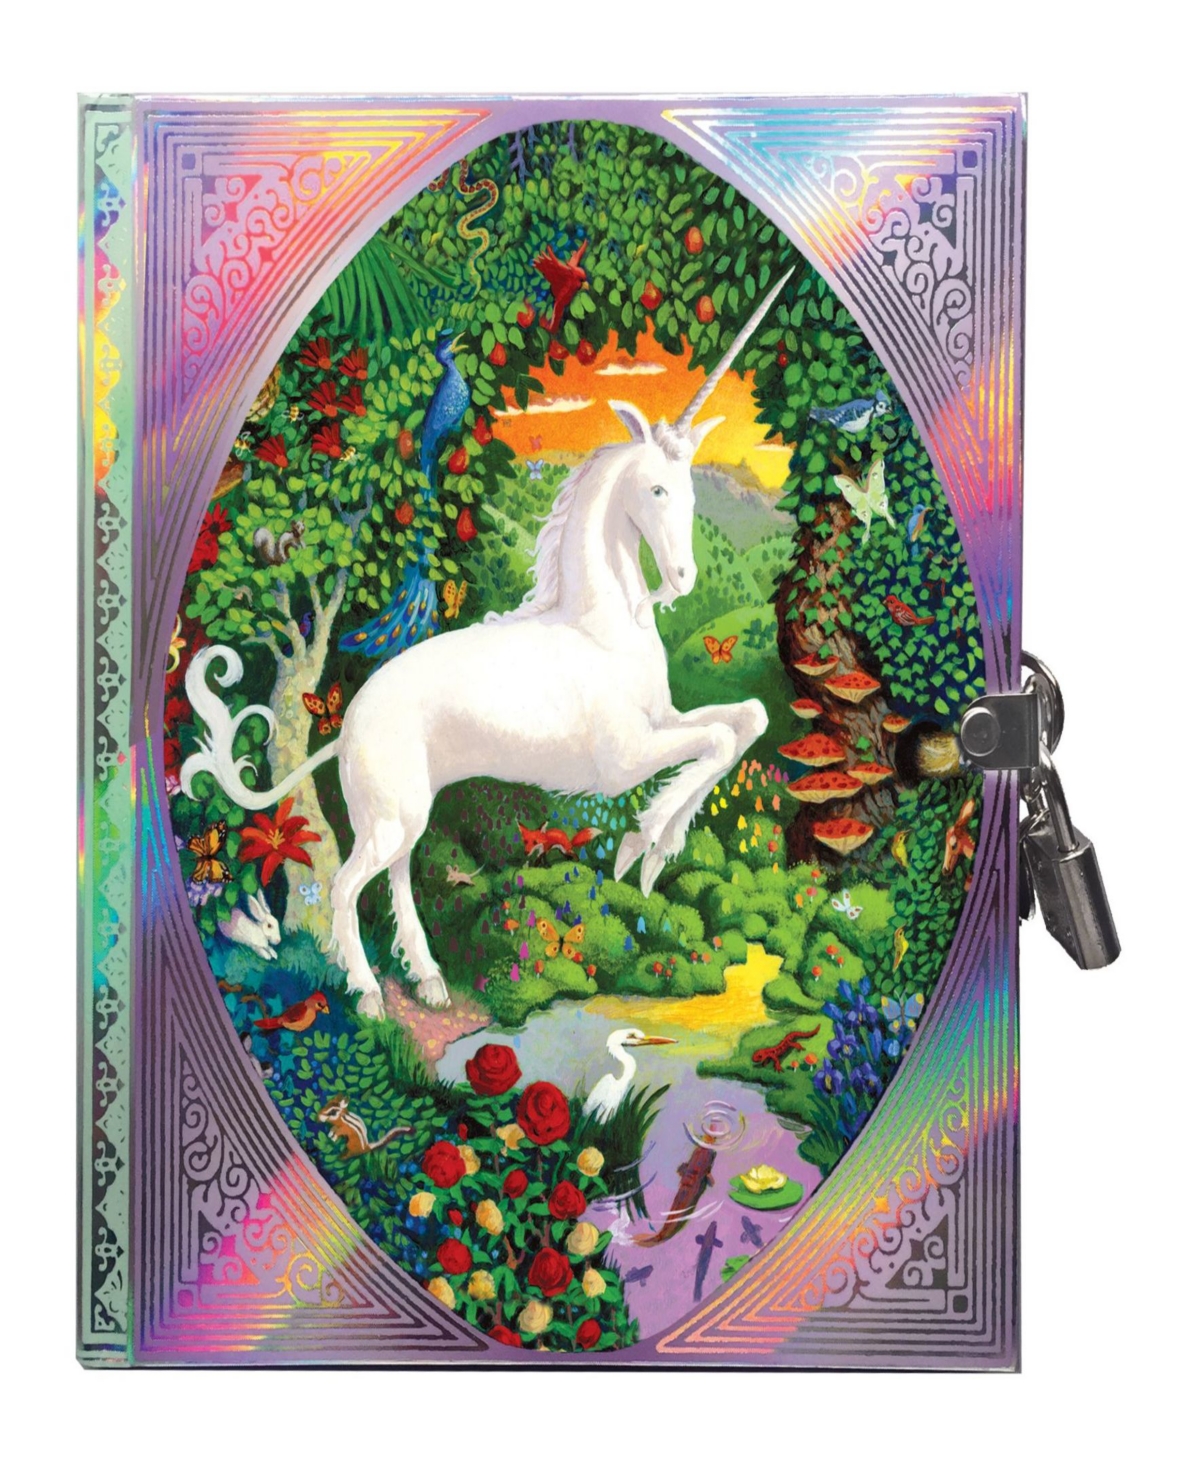 Unicorn Hardcover Journal with Lock and Key - Multi